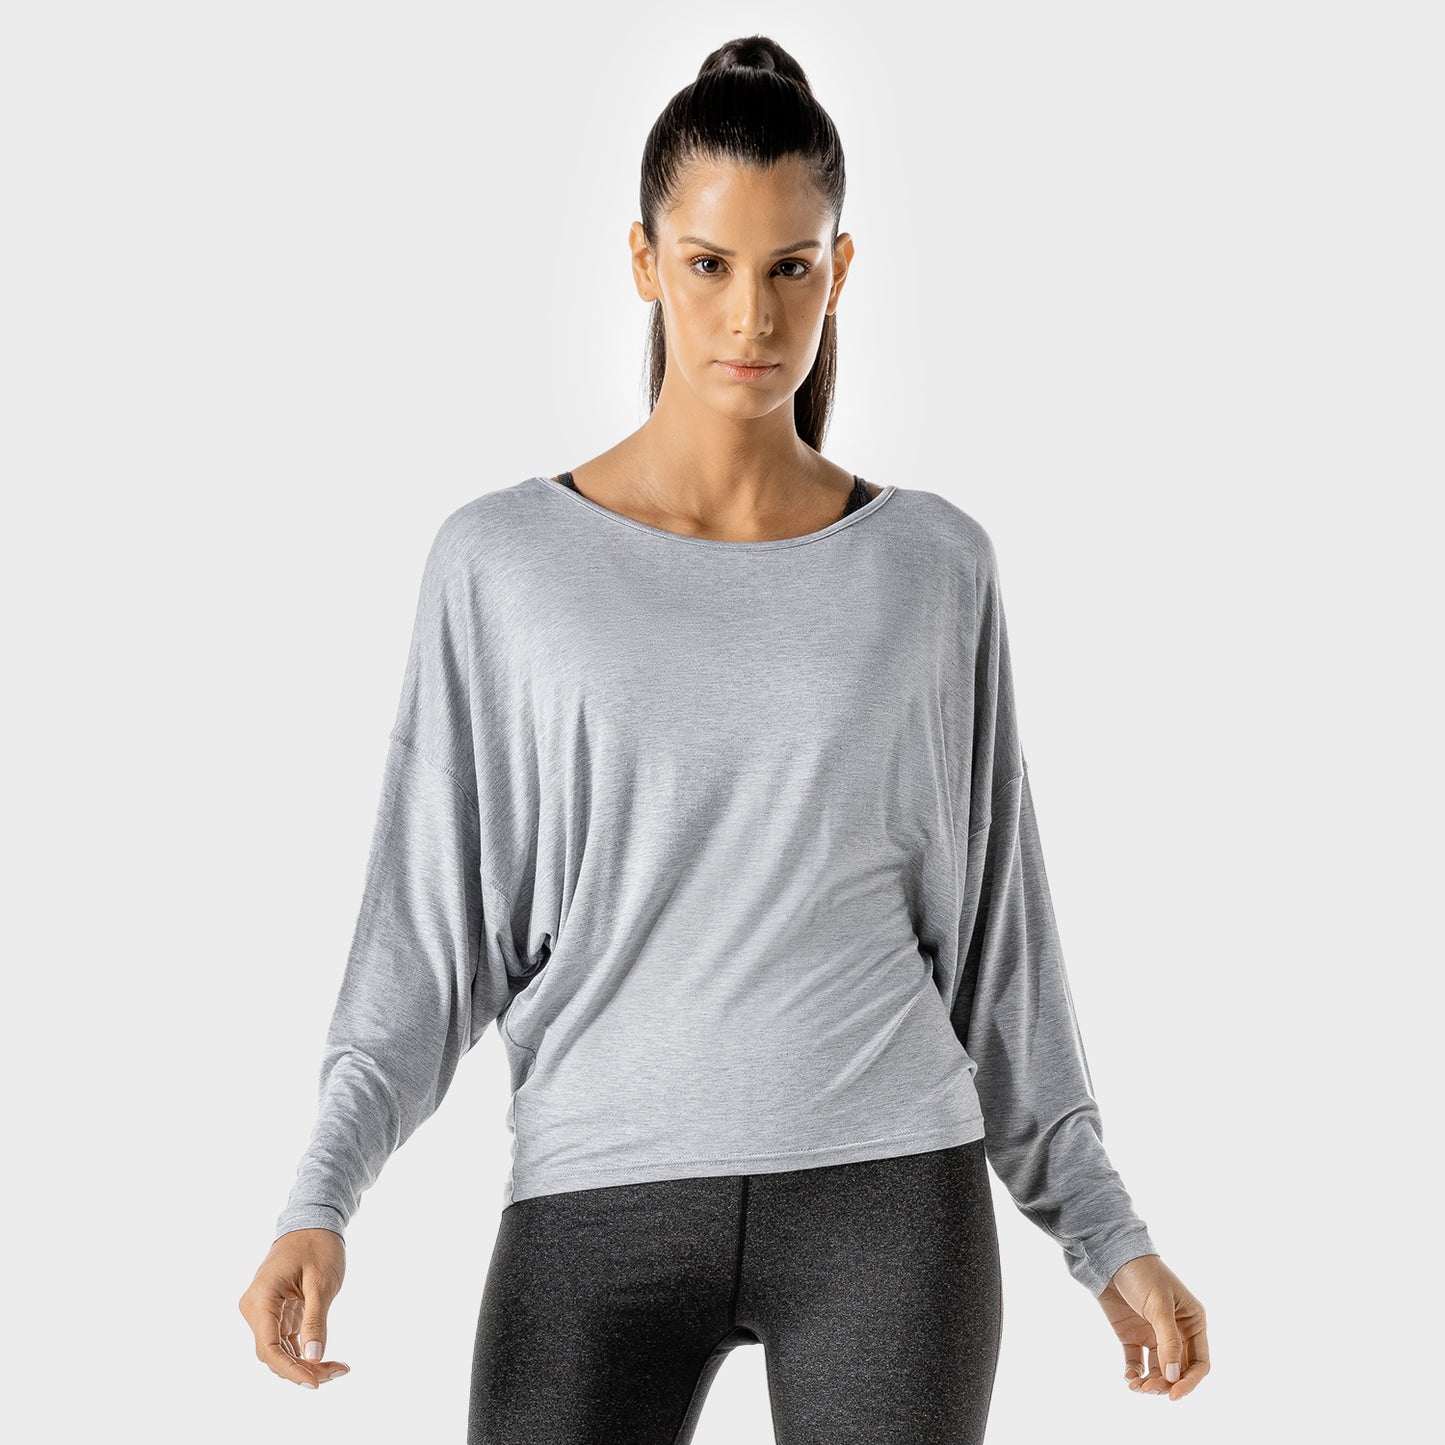 squatwolf-gym-wear-womens-fitness-batwing-top-grey-workout-shirts